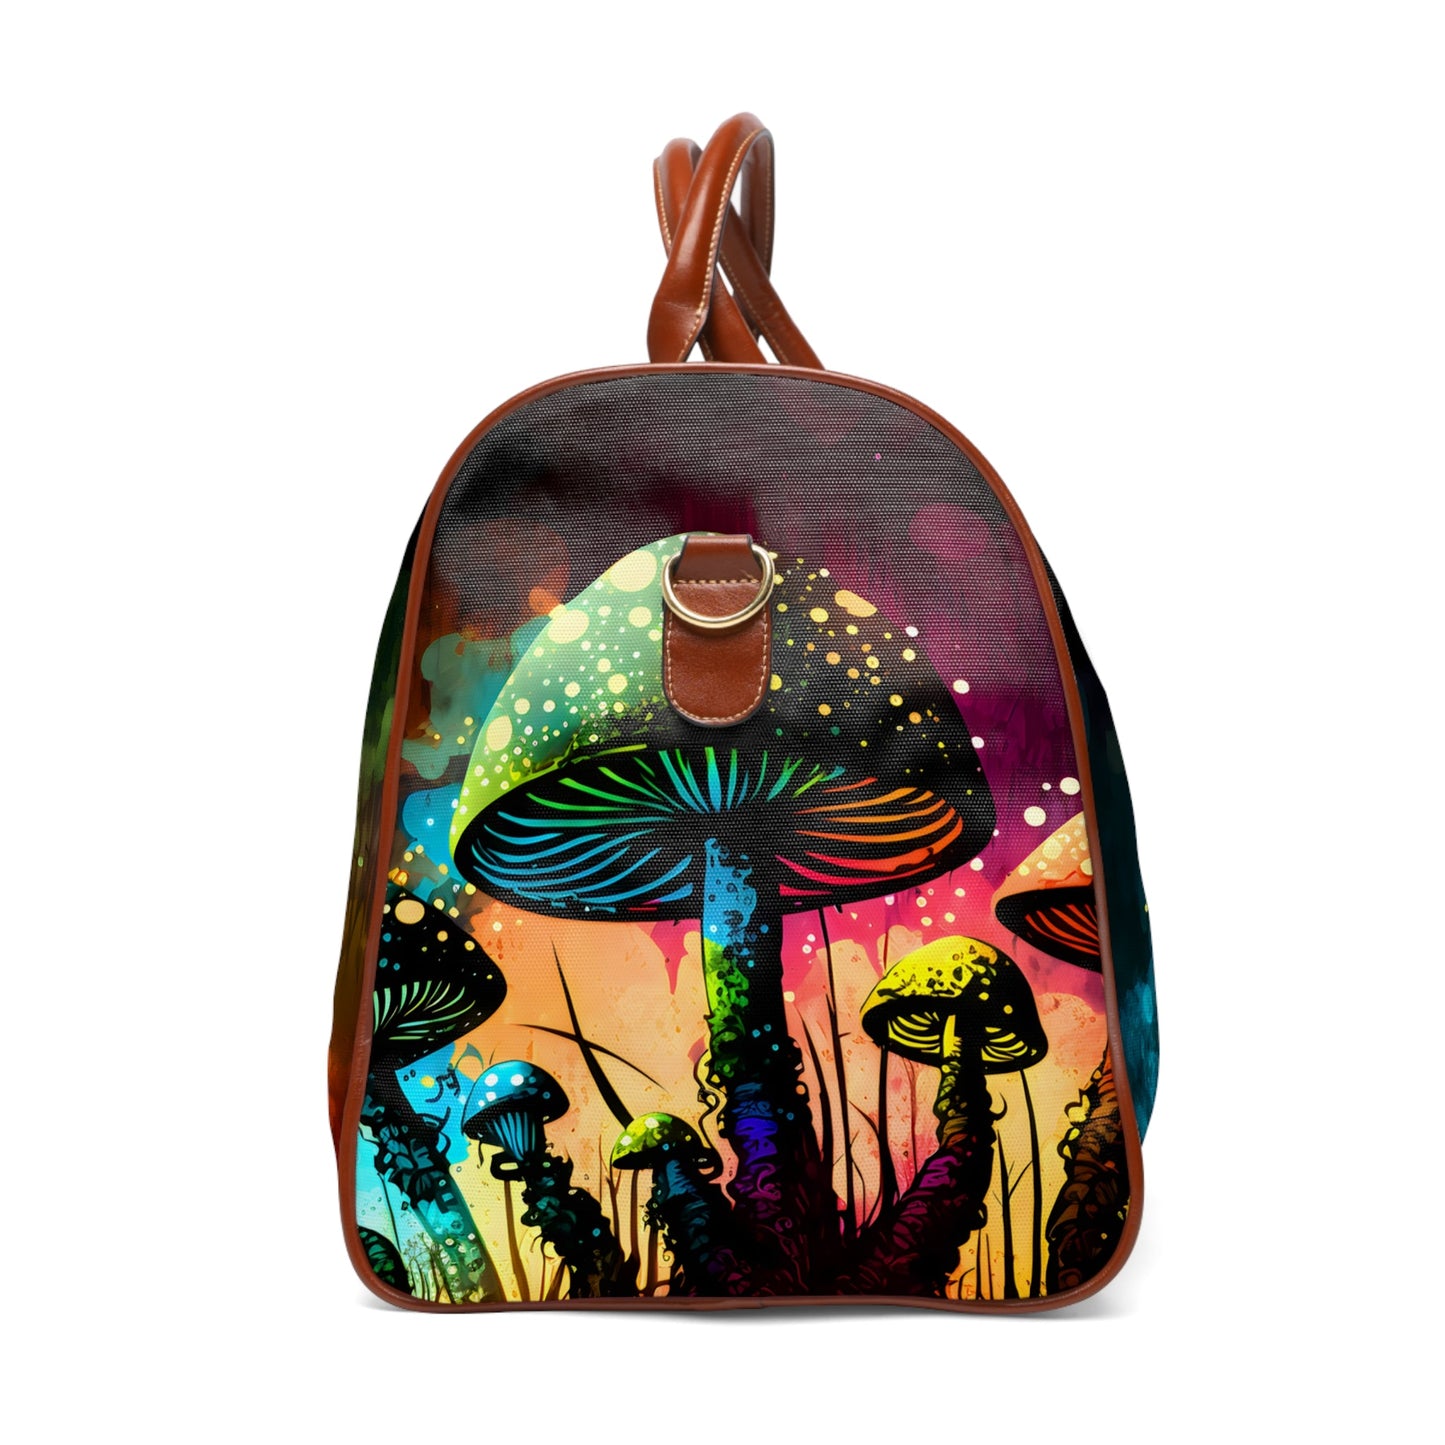 Mushroom Travel Bag - Bigger than most duffle bags, tote bags and even most weekender bags!